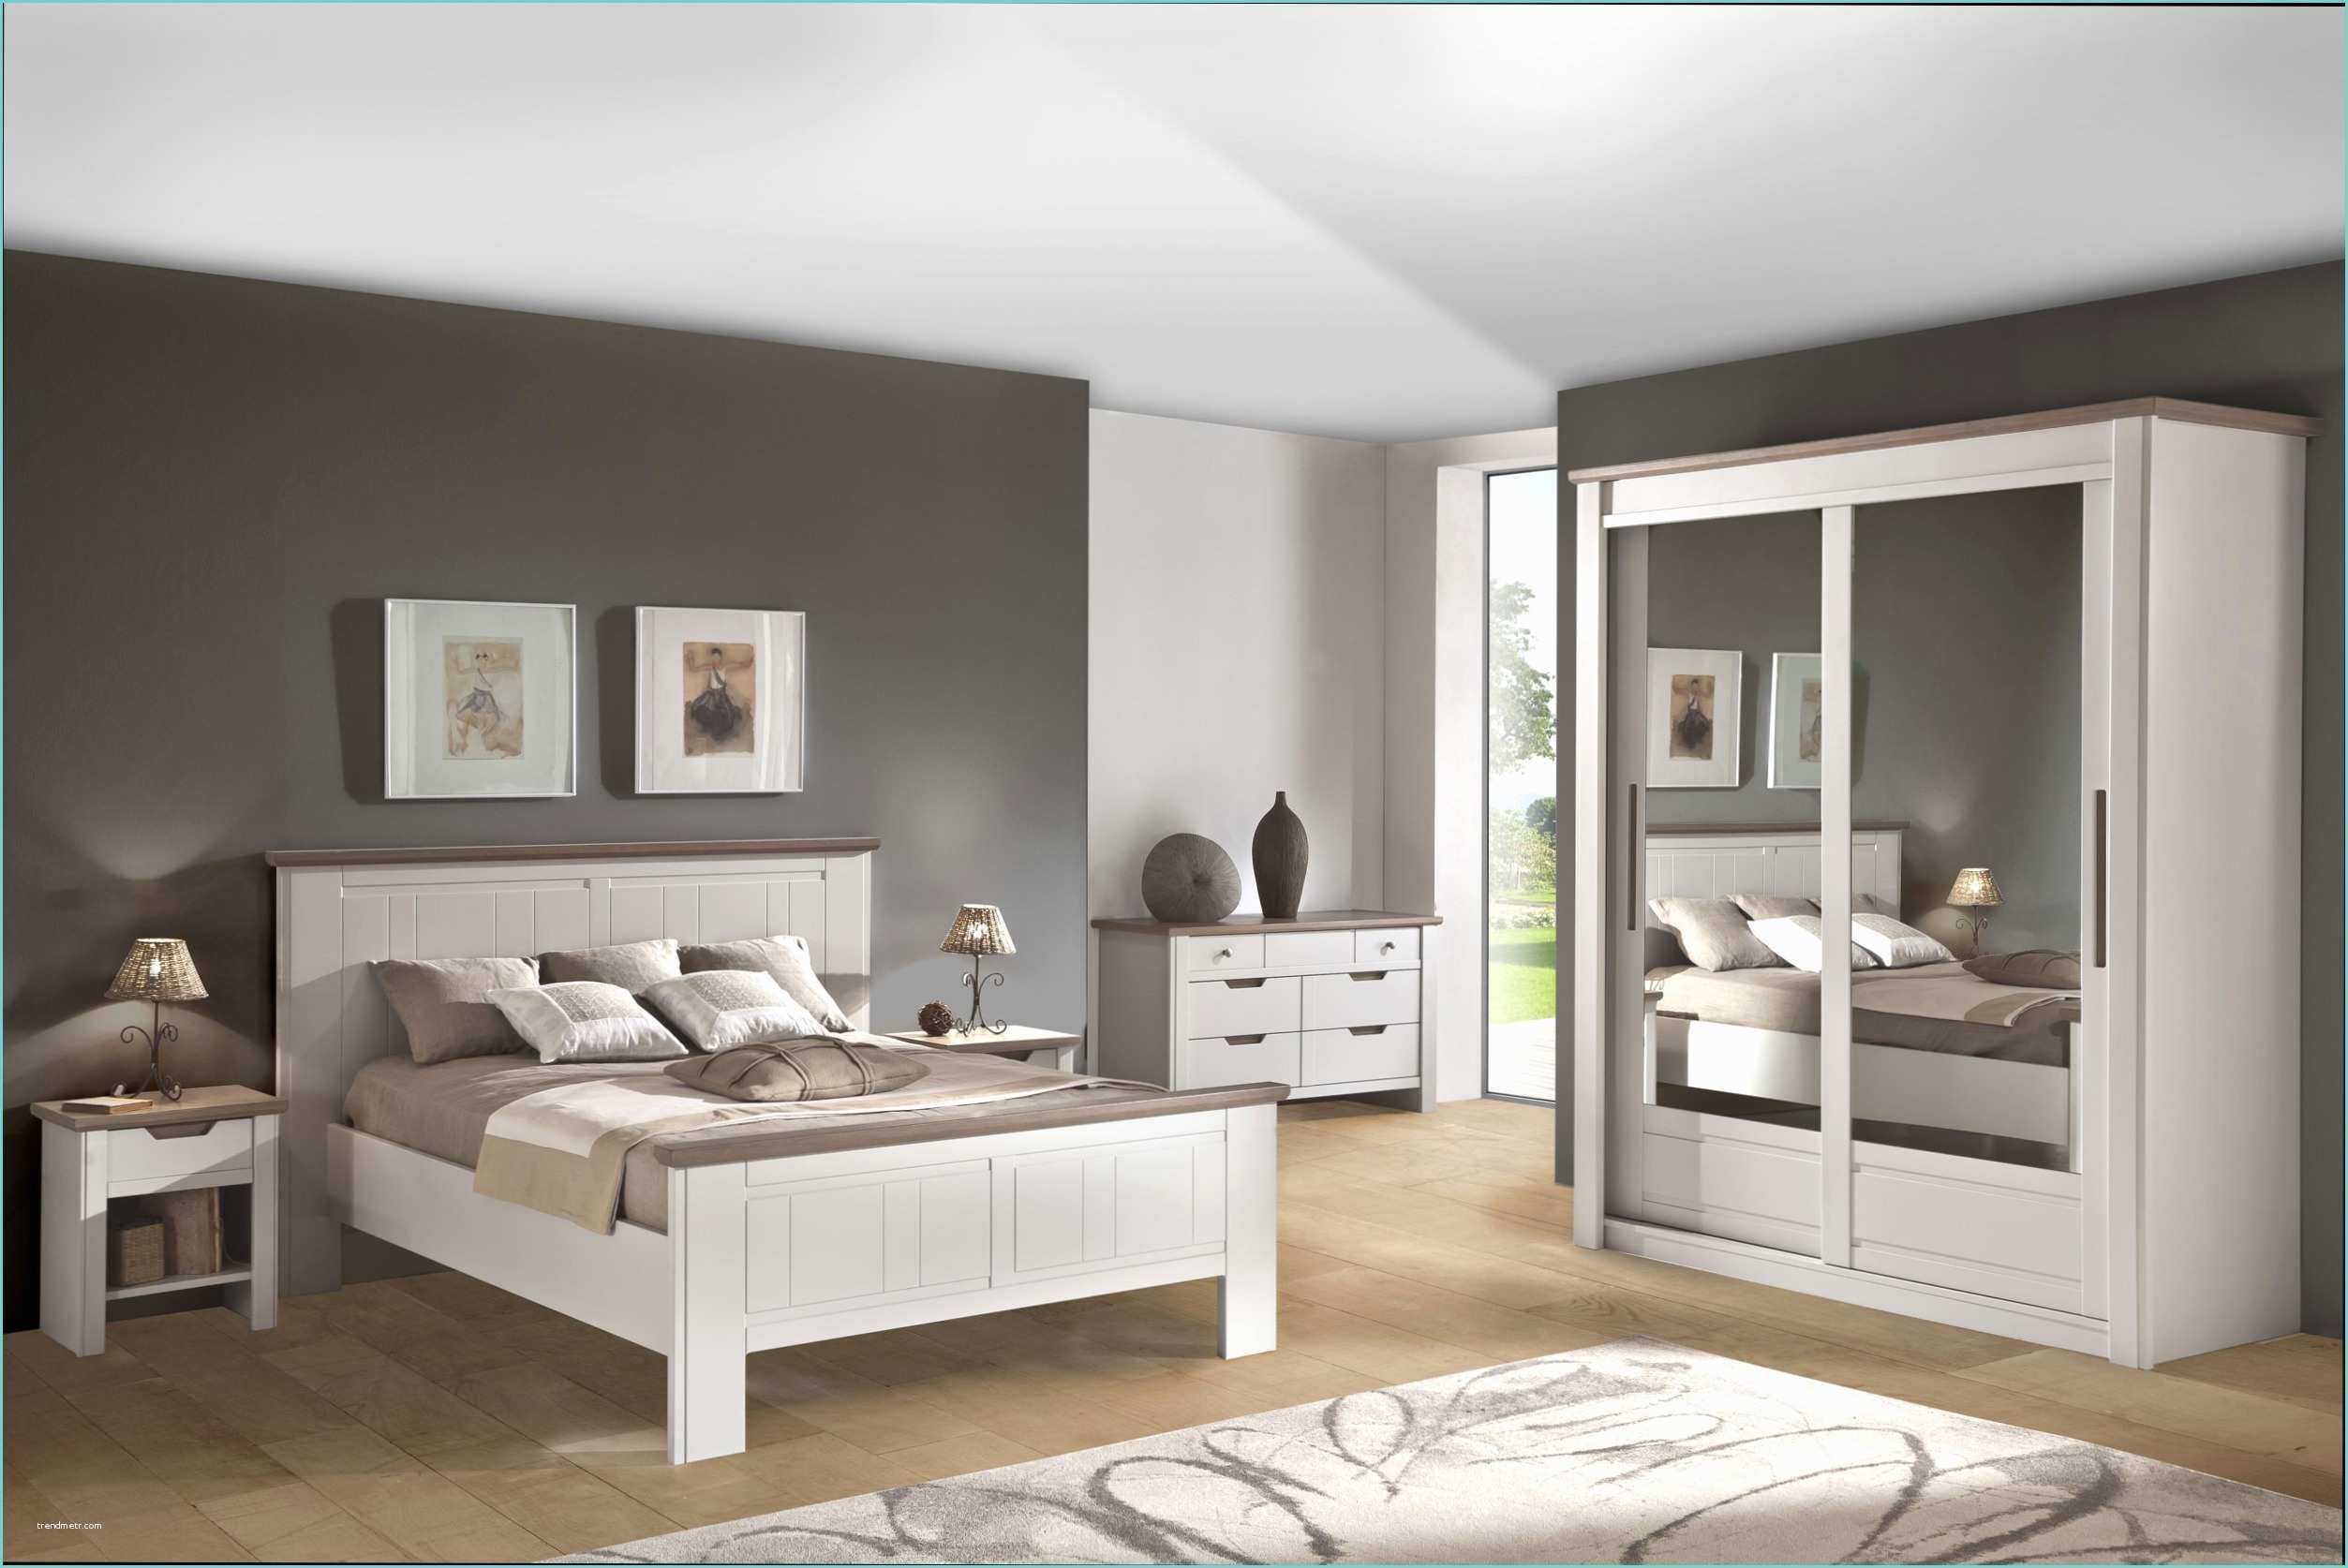 Ide Dco Chambre Adulte Moderne Idees Deco Chambre Adulte Cool Dcoration Chambre Adulte